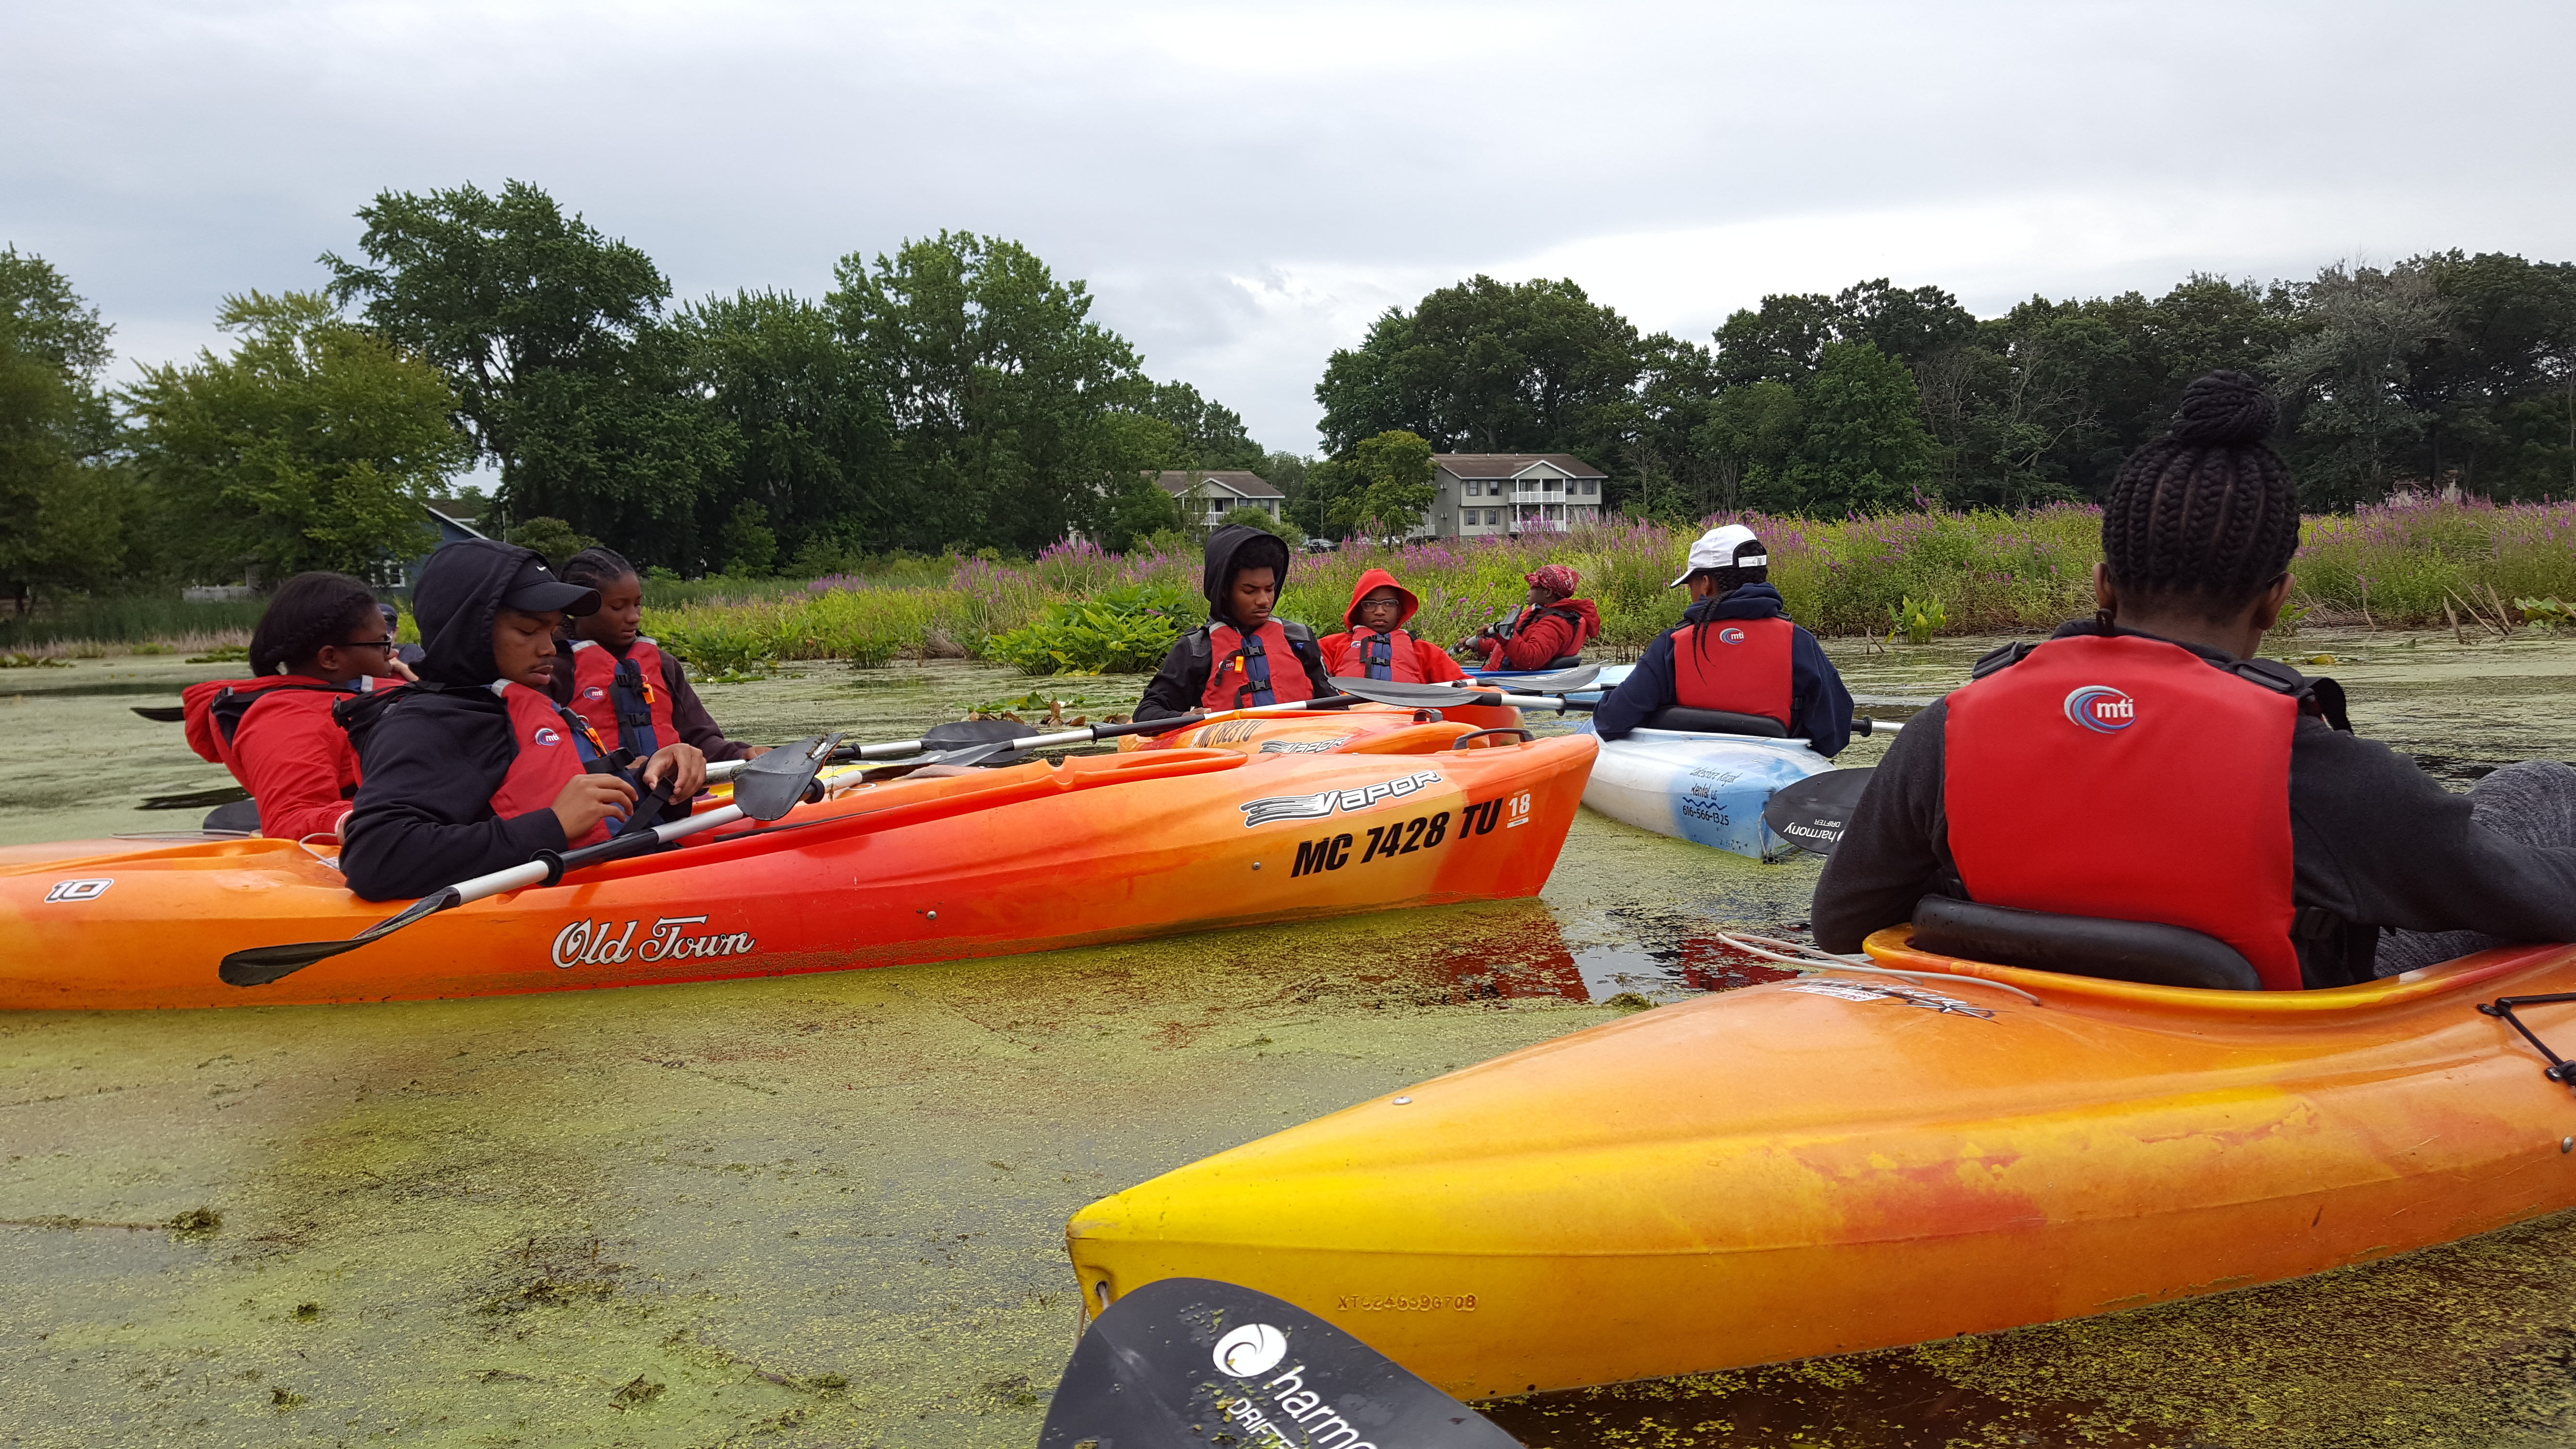 Detroit ICO participants gather together on the water in their kayaks.